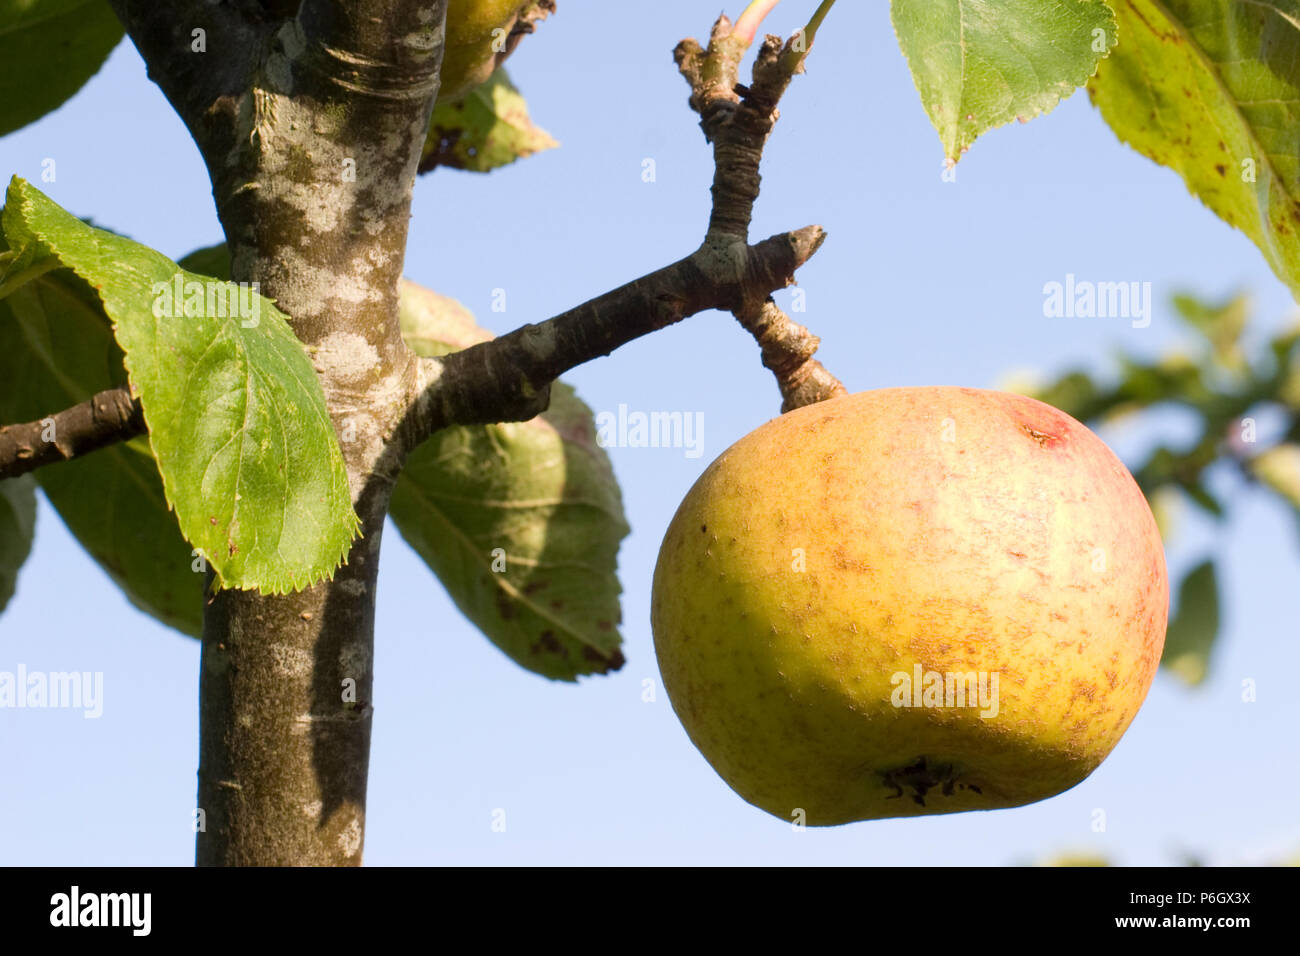 Orleans Reinette. Dessert and cooking apple. Ripe fruit on a tree in an organic orchard in Bristol. Stock Photo